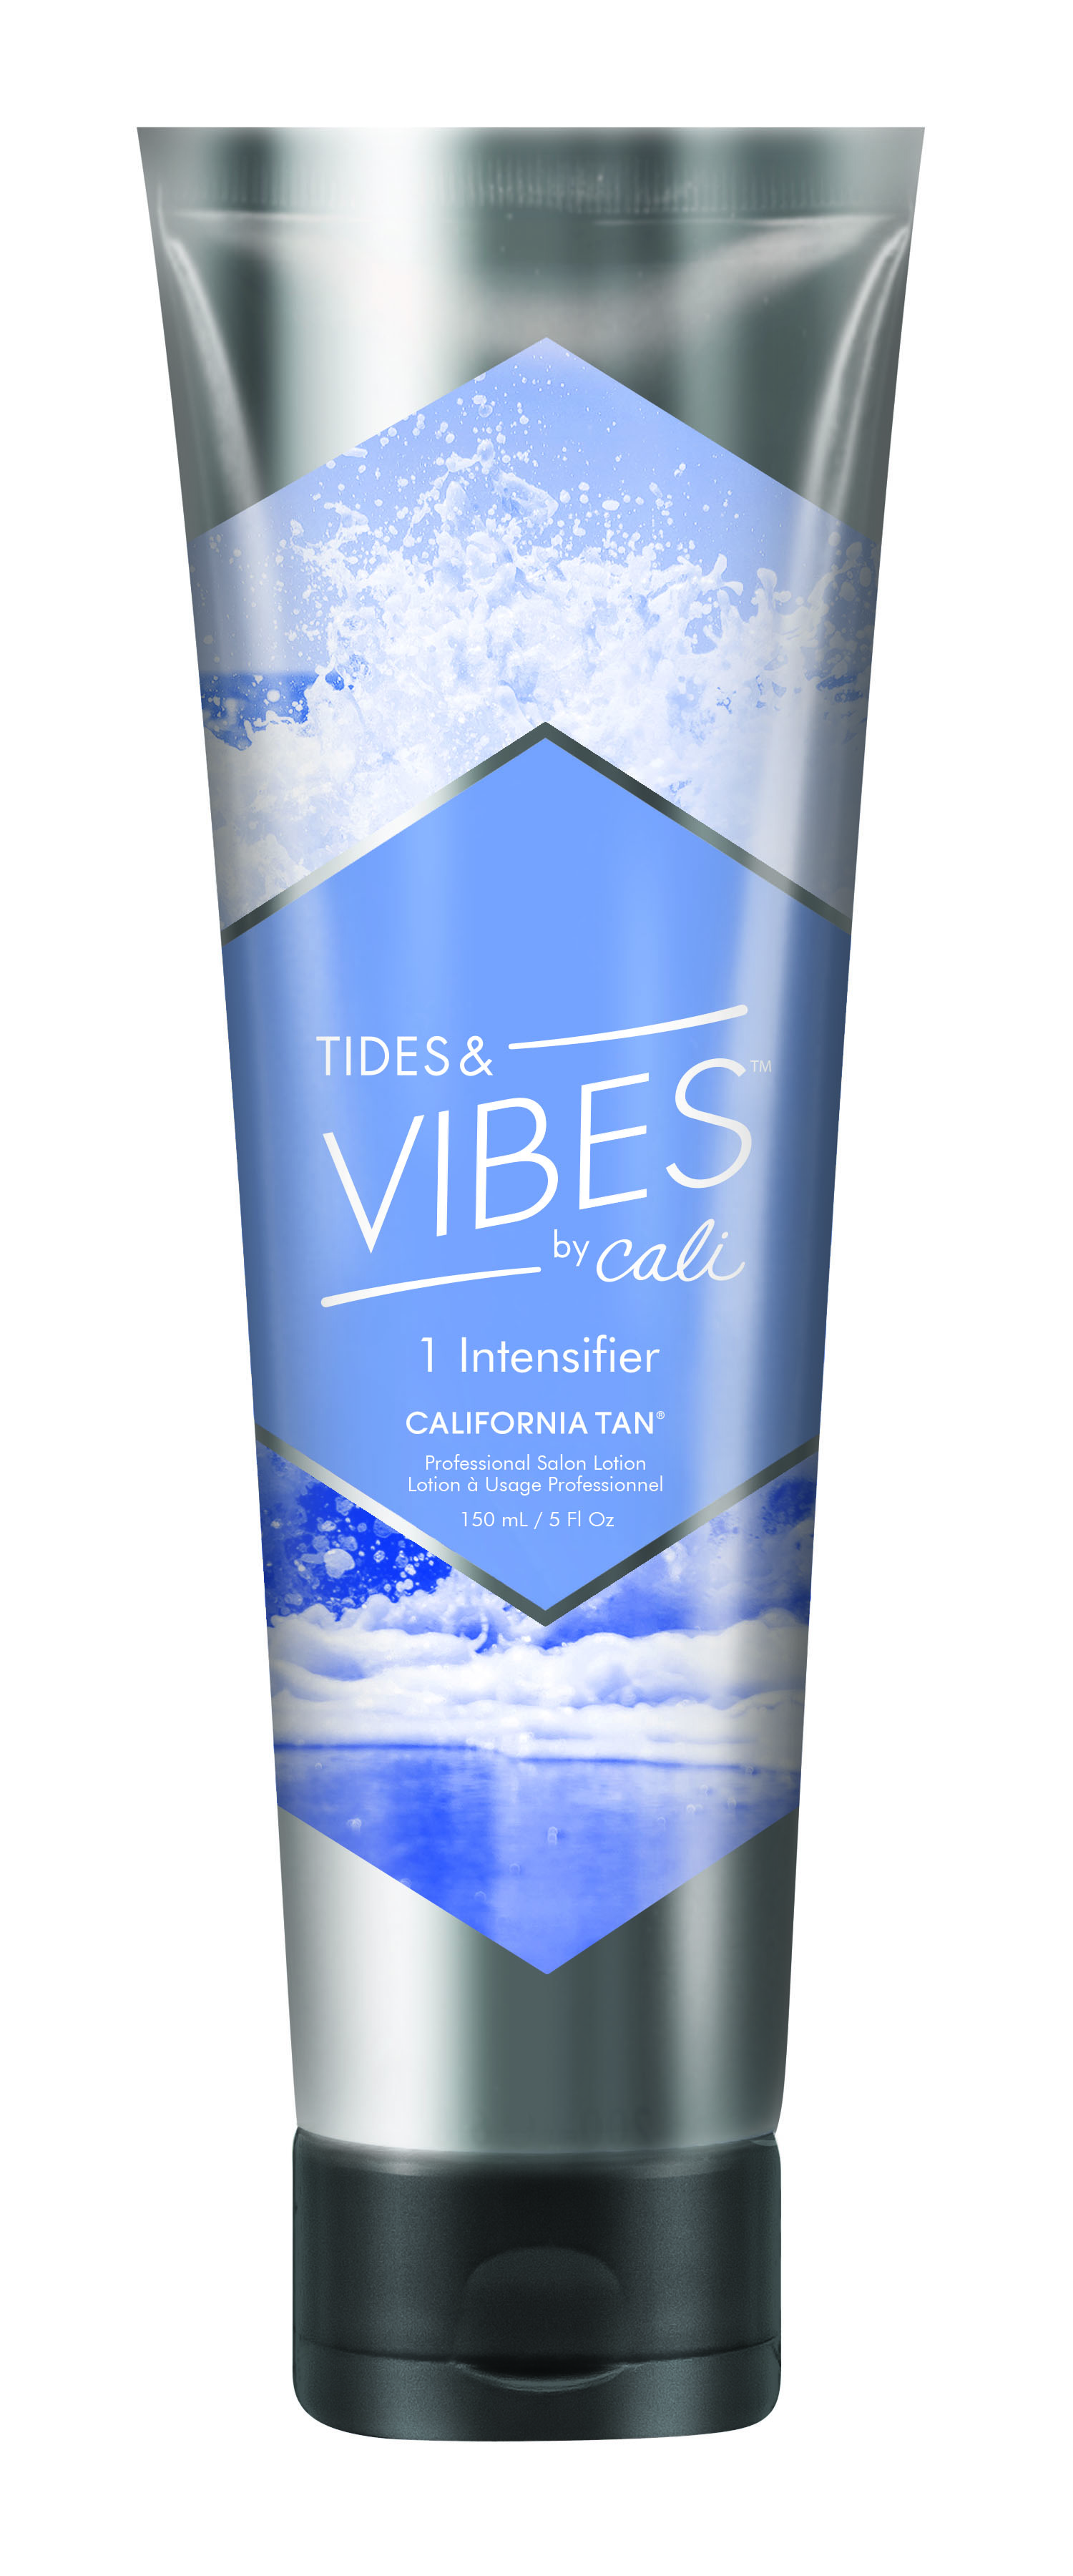 Tides & Vibes™ by Cali Intensifier